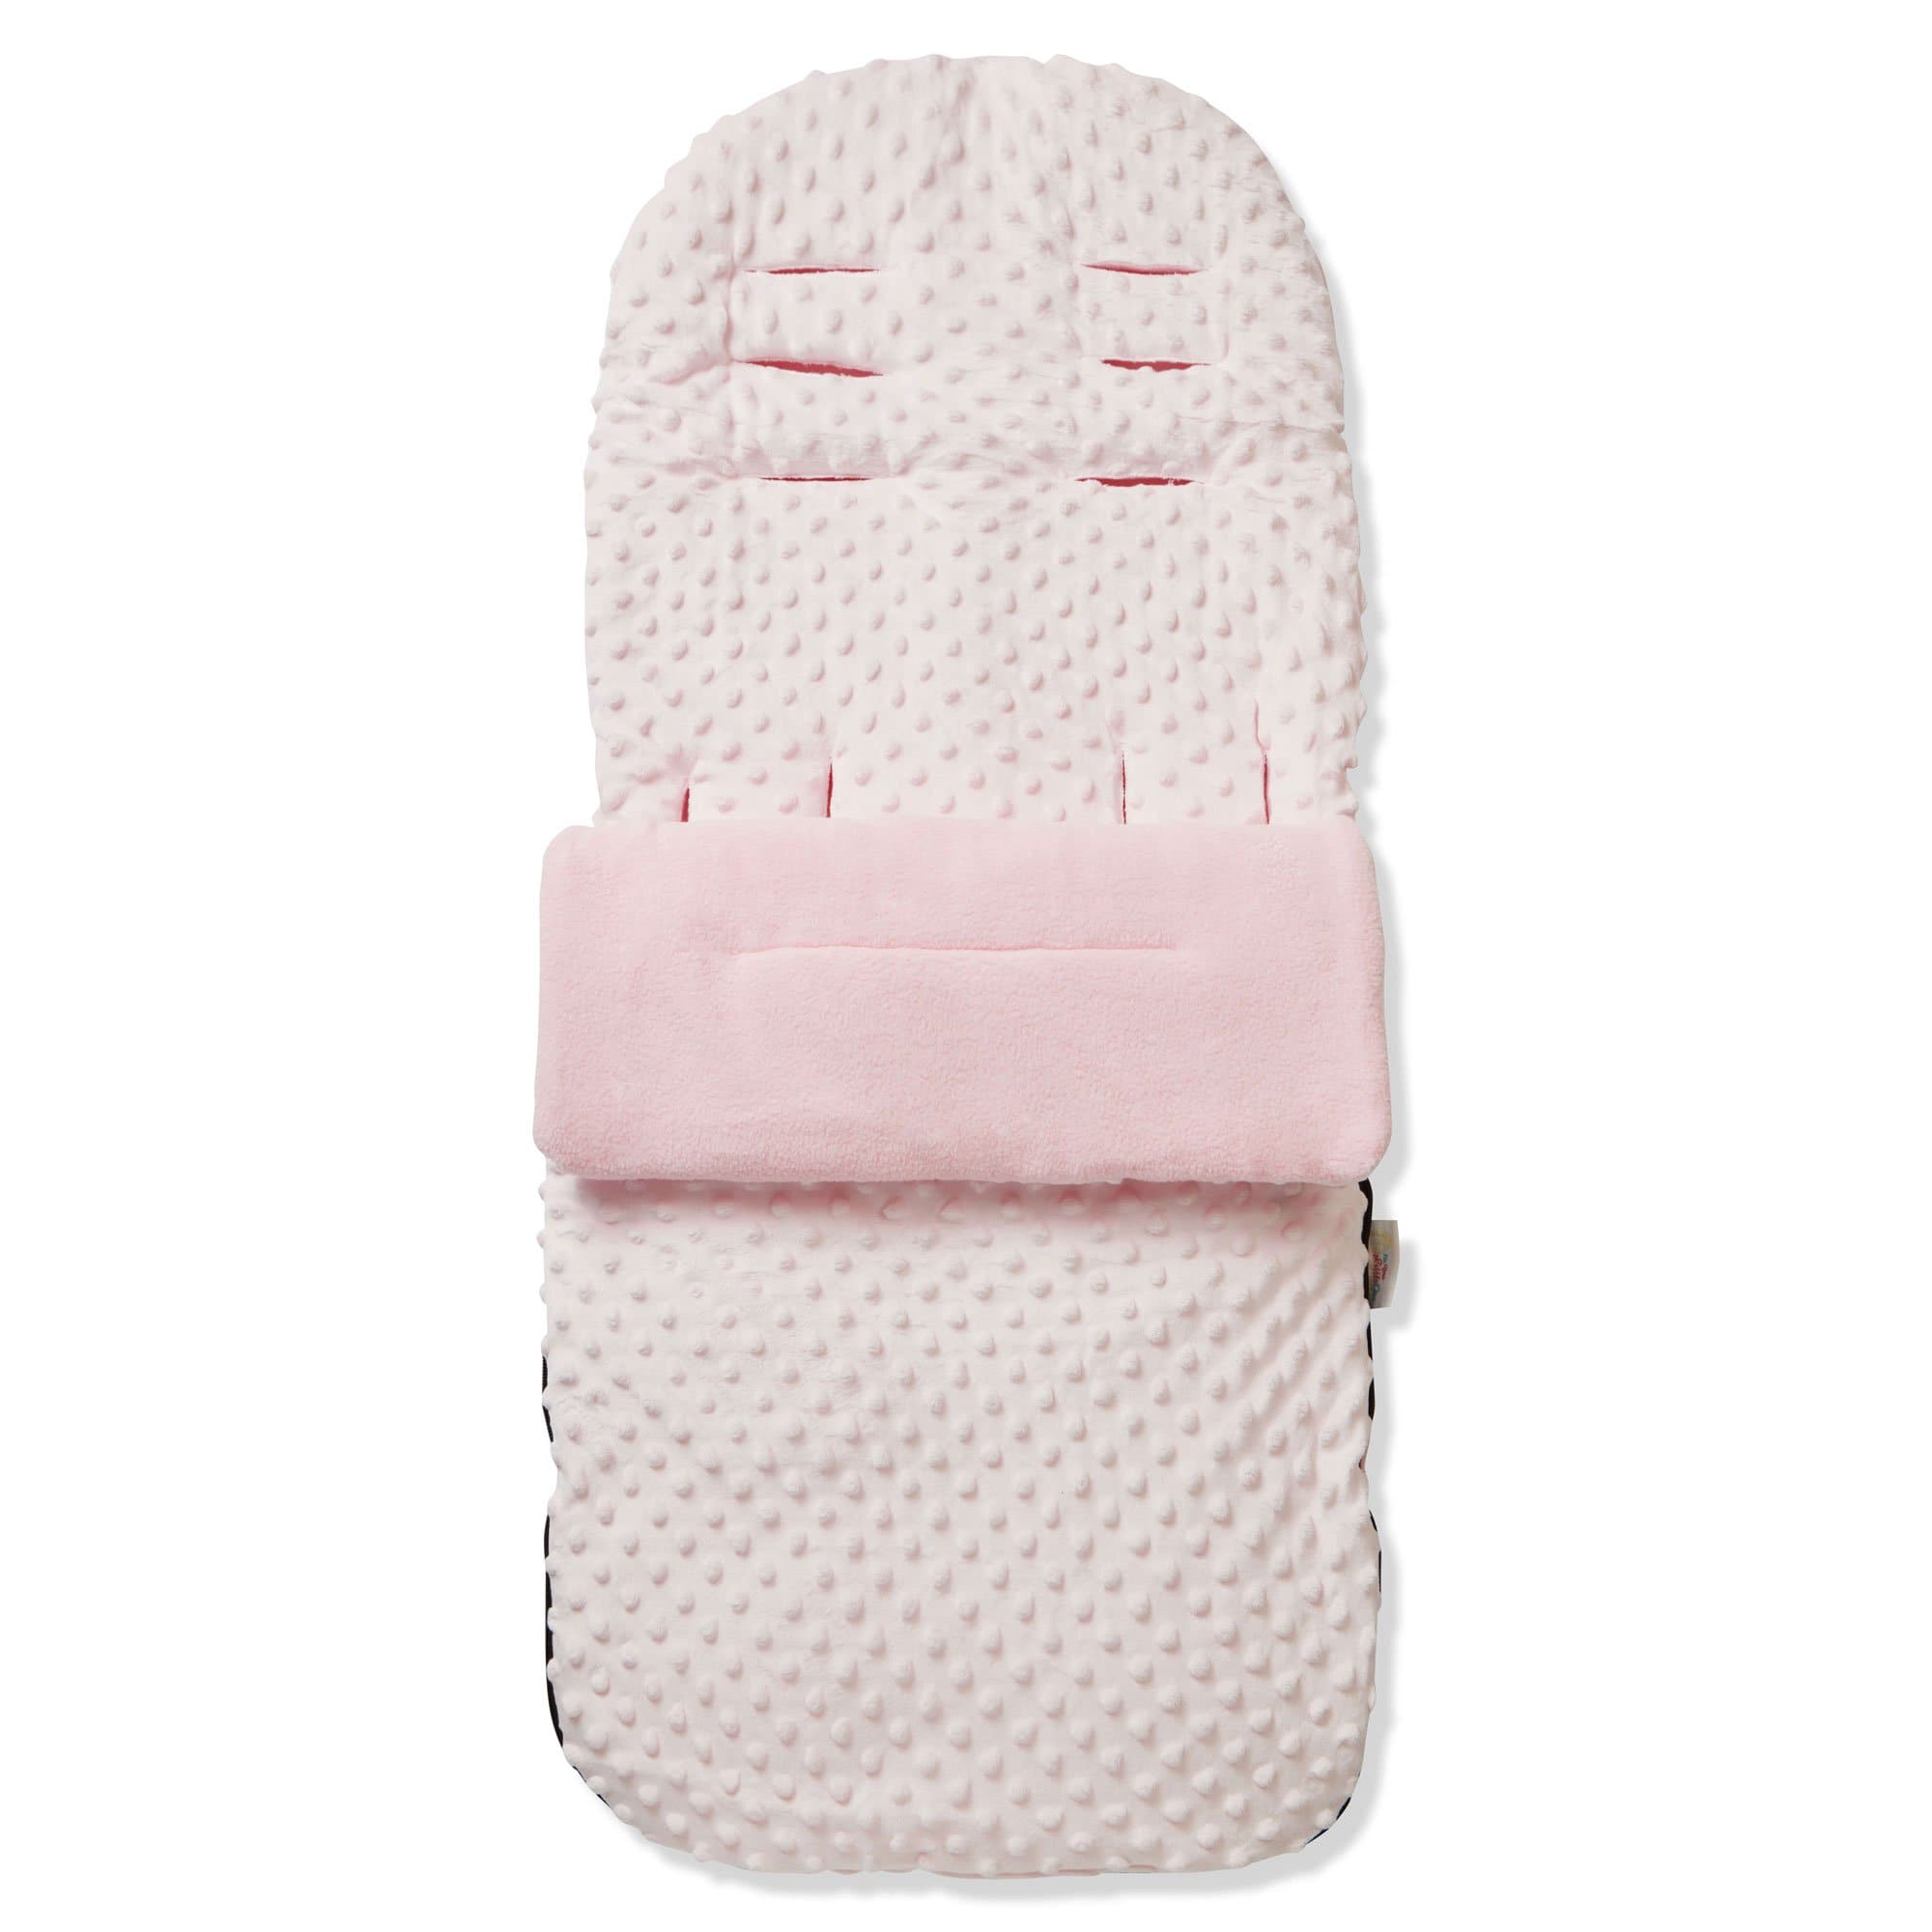 Dimple Footmuff / Cosy Toes Compatible with Pericles - For Your Little One